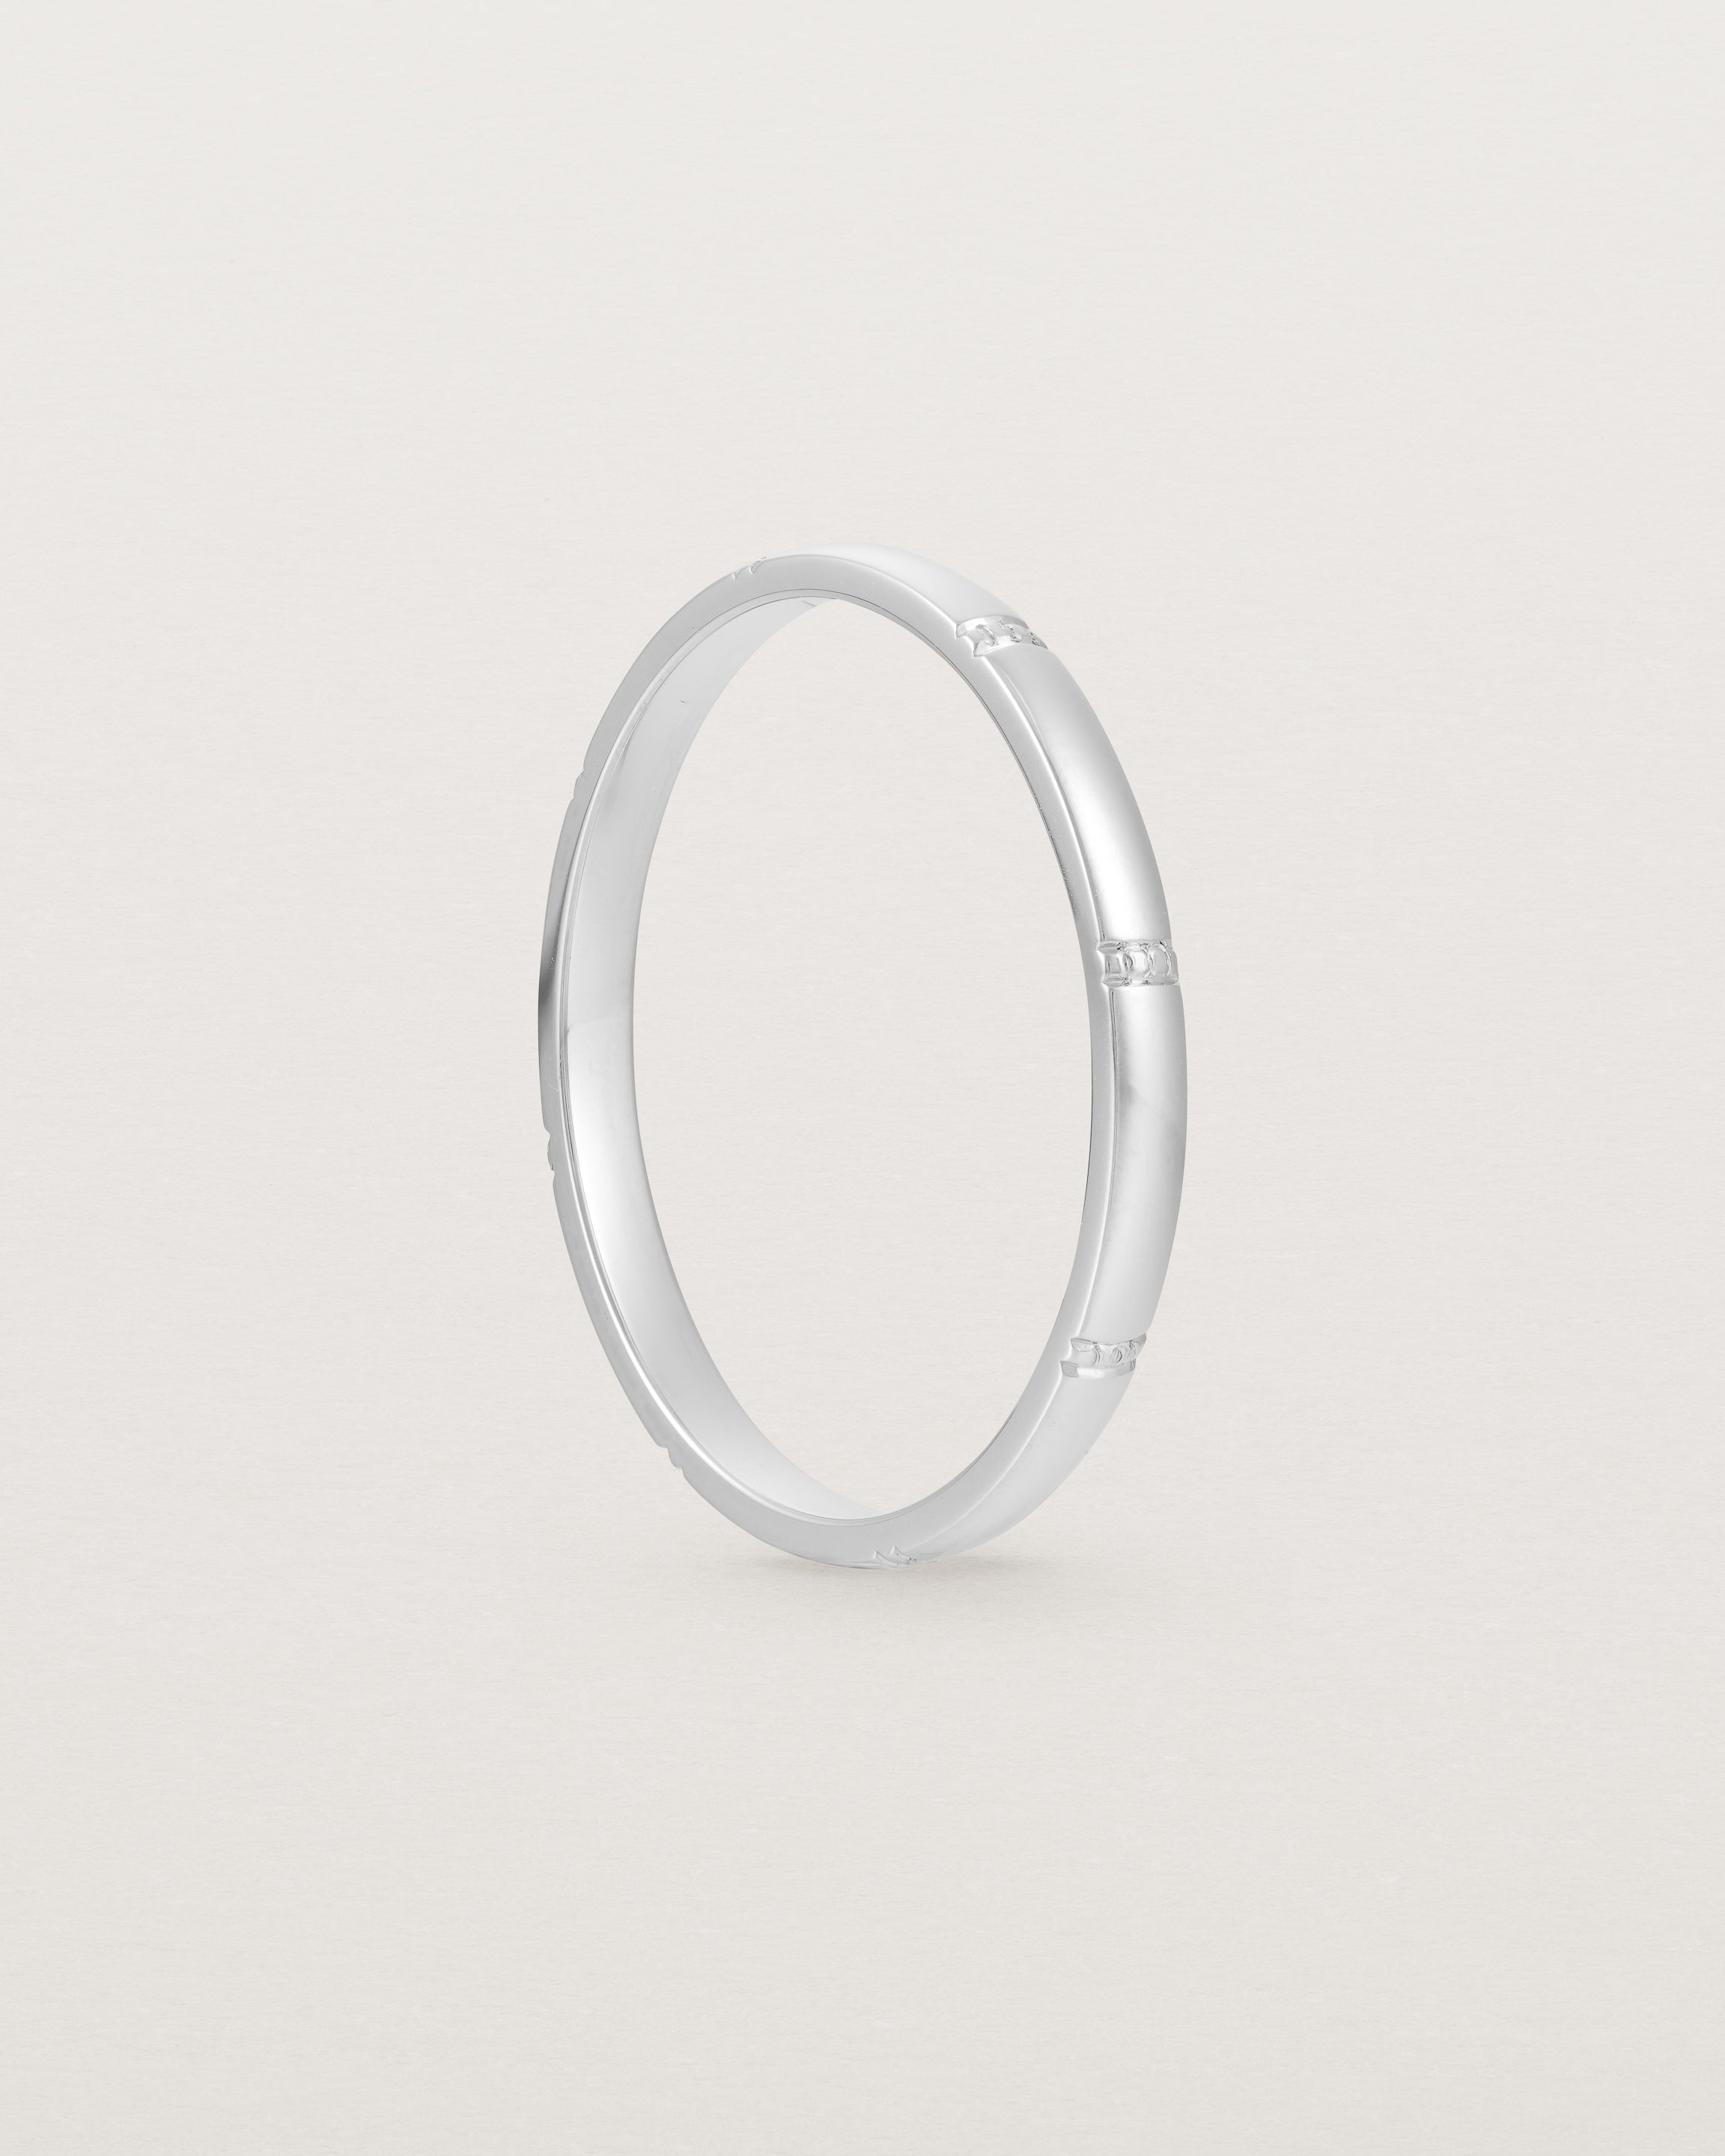 Standing view of the Grain Wedding Ring | 2mm | White Gold.